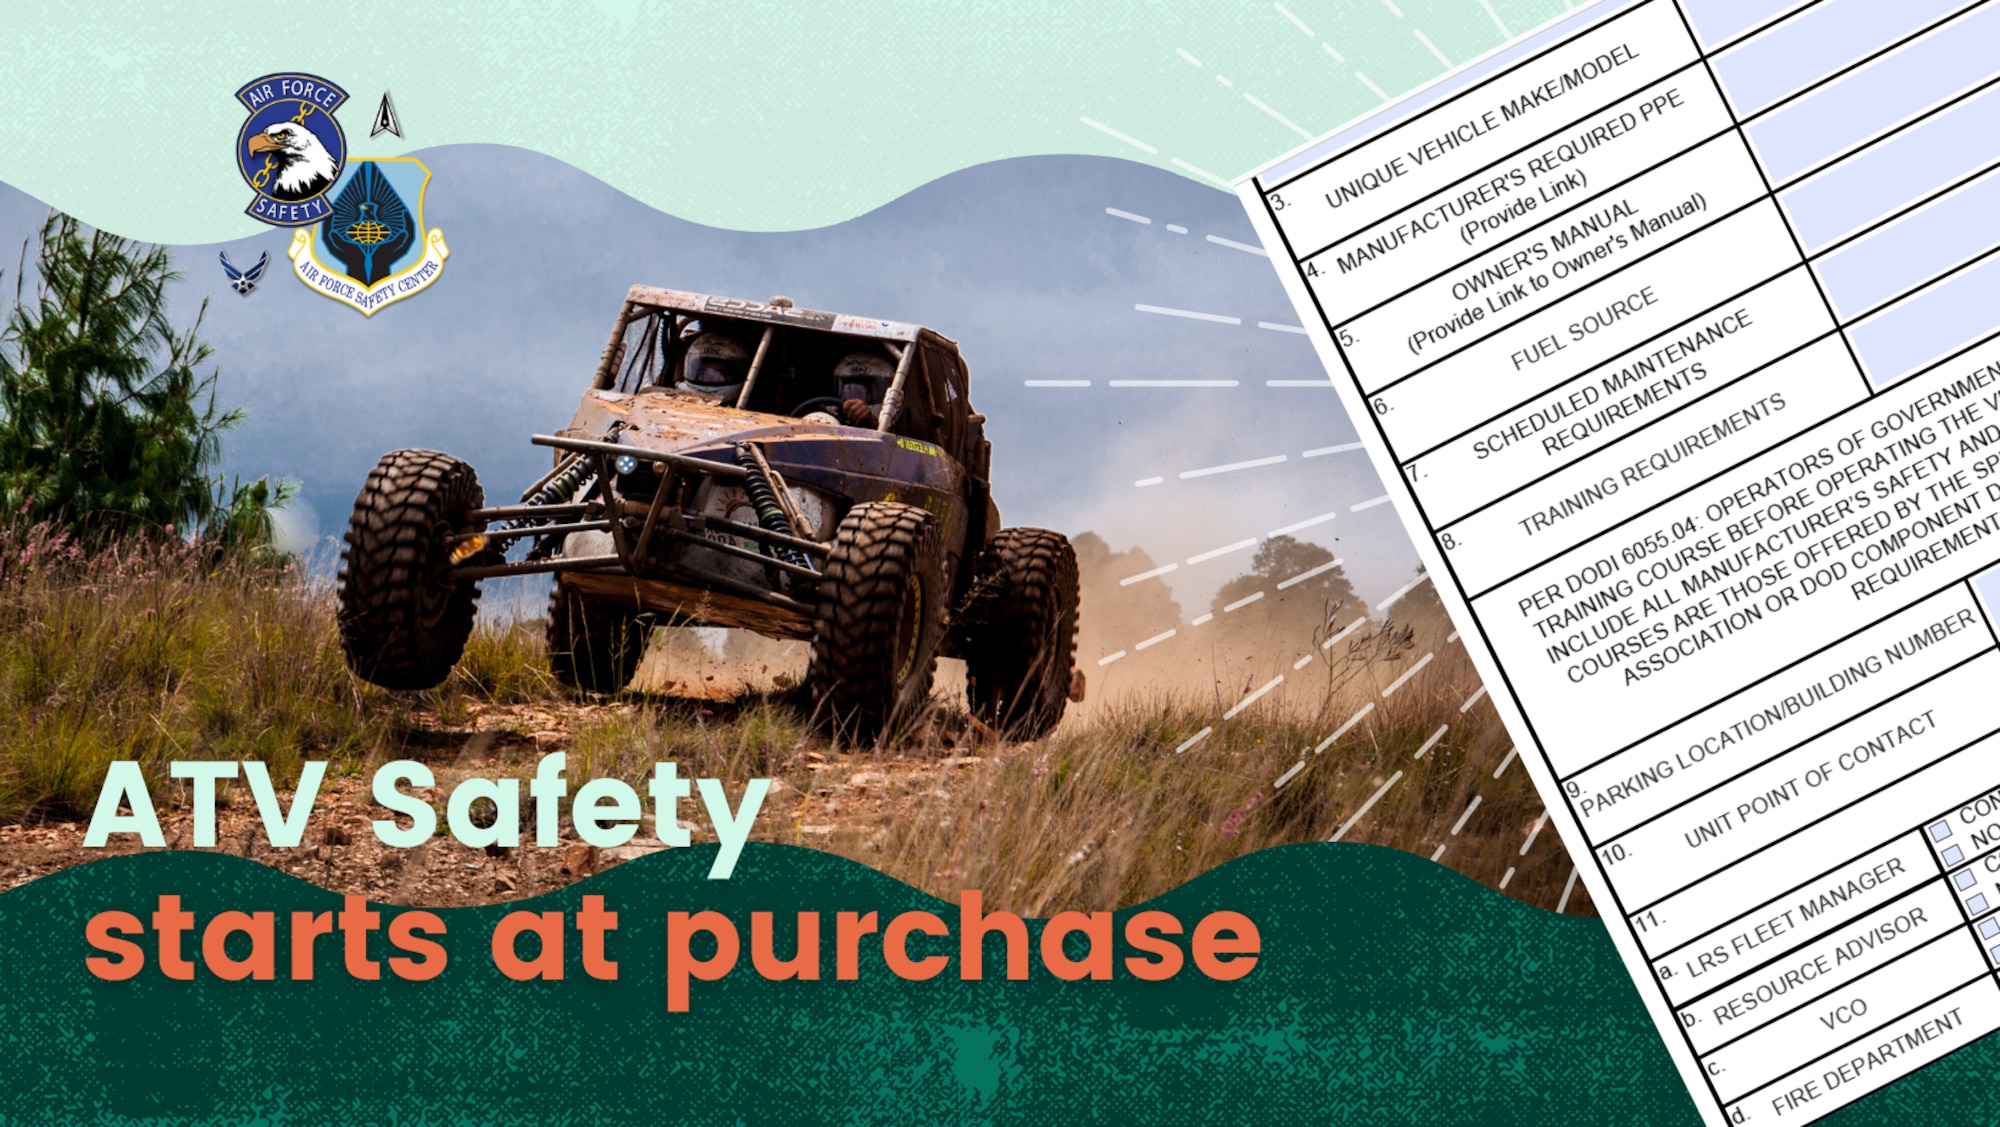 ATV Safety Starts at Purchase. Image features an off-road tactical vehicle, Purchasing Form, with mountainous backdrop, and AFSEC logo.